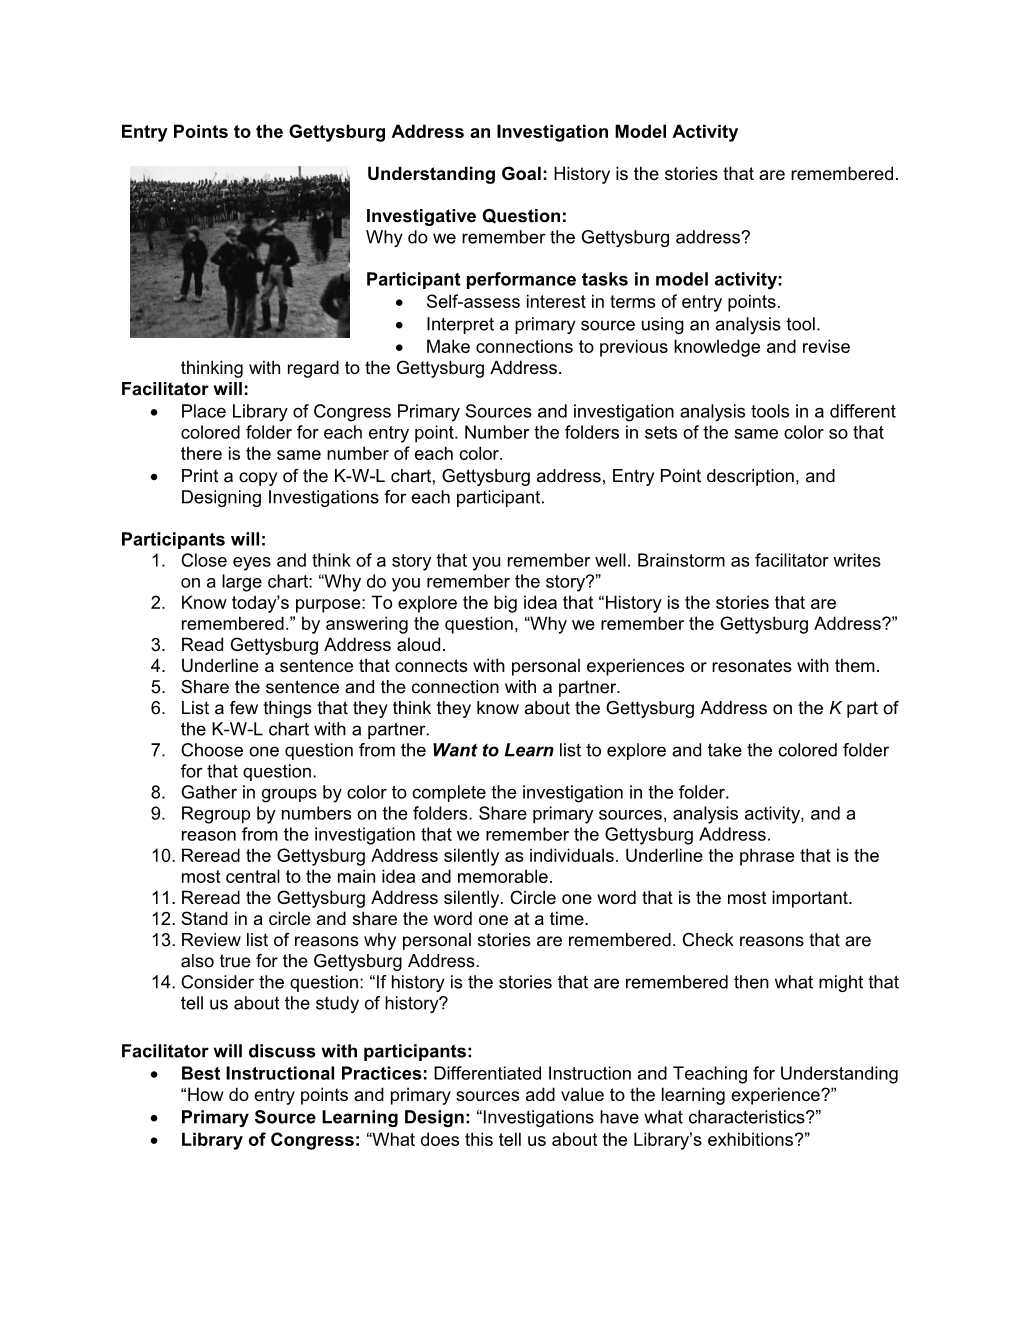 Entry Points to the Gettysburg Address an Investigation Model Activity